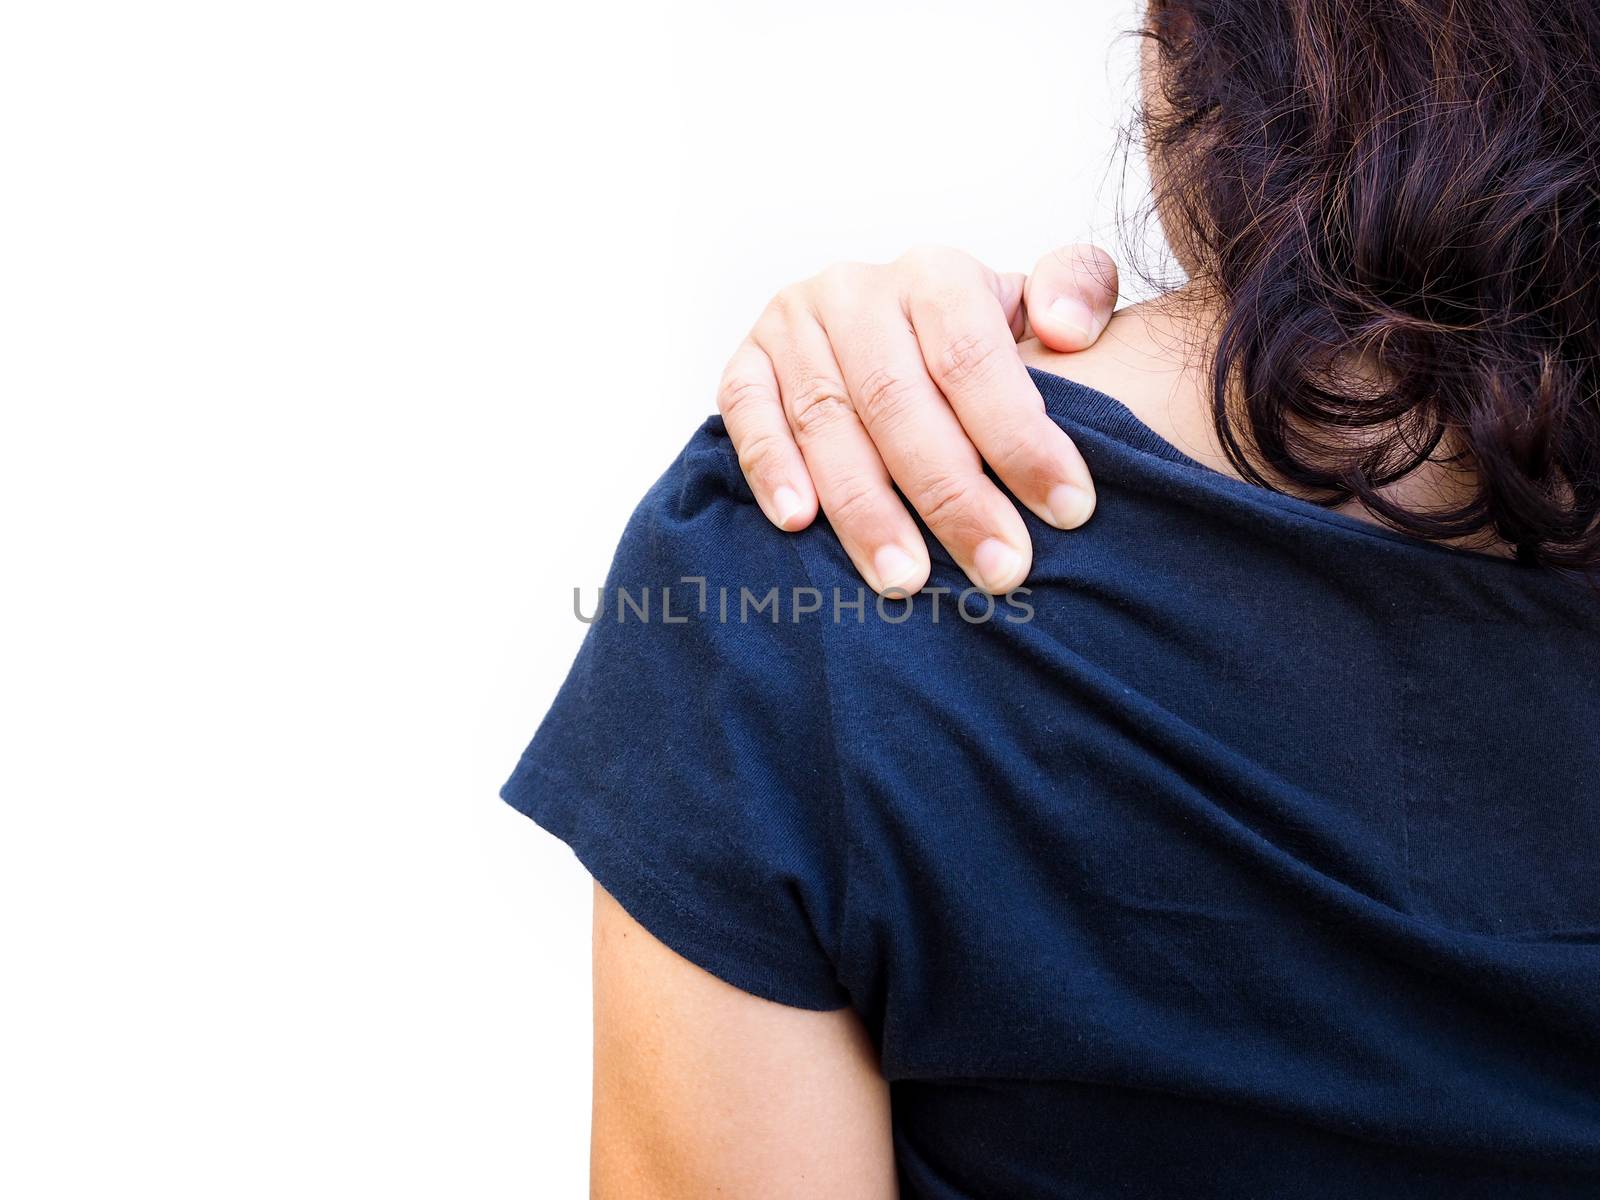 Women suffering from muscle pain, Back and shoulder pain by kittima05